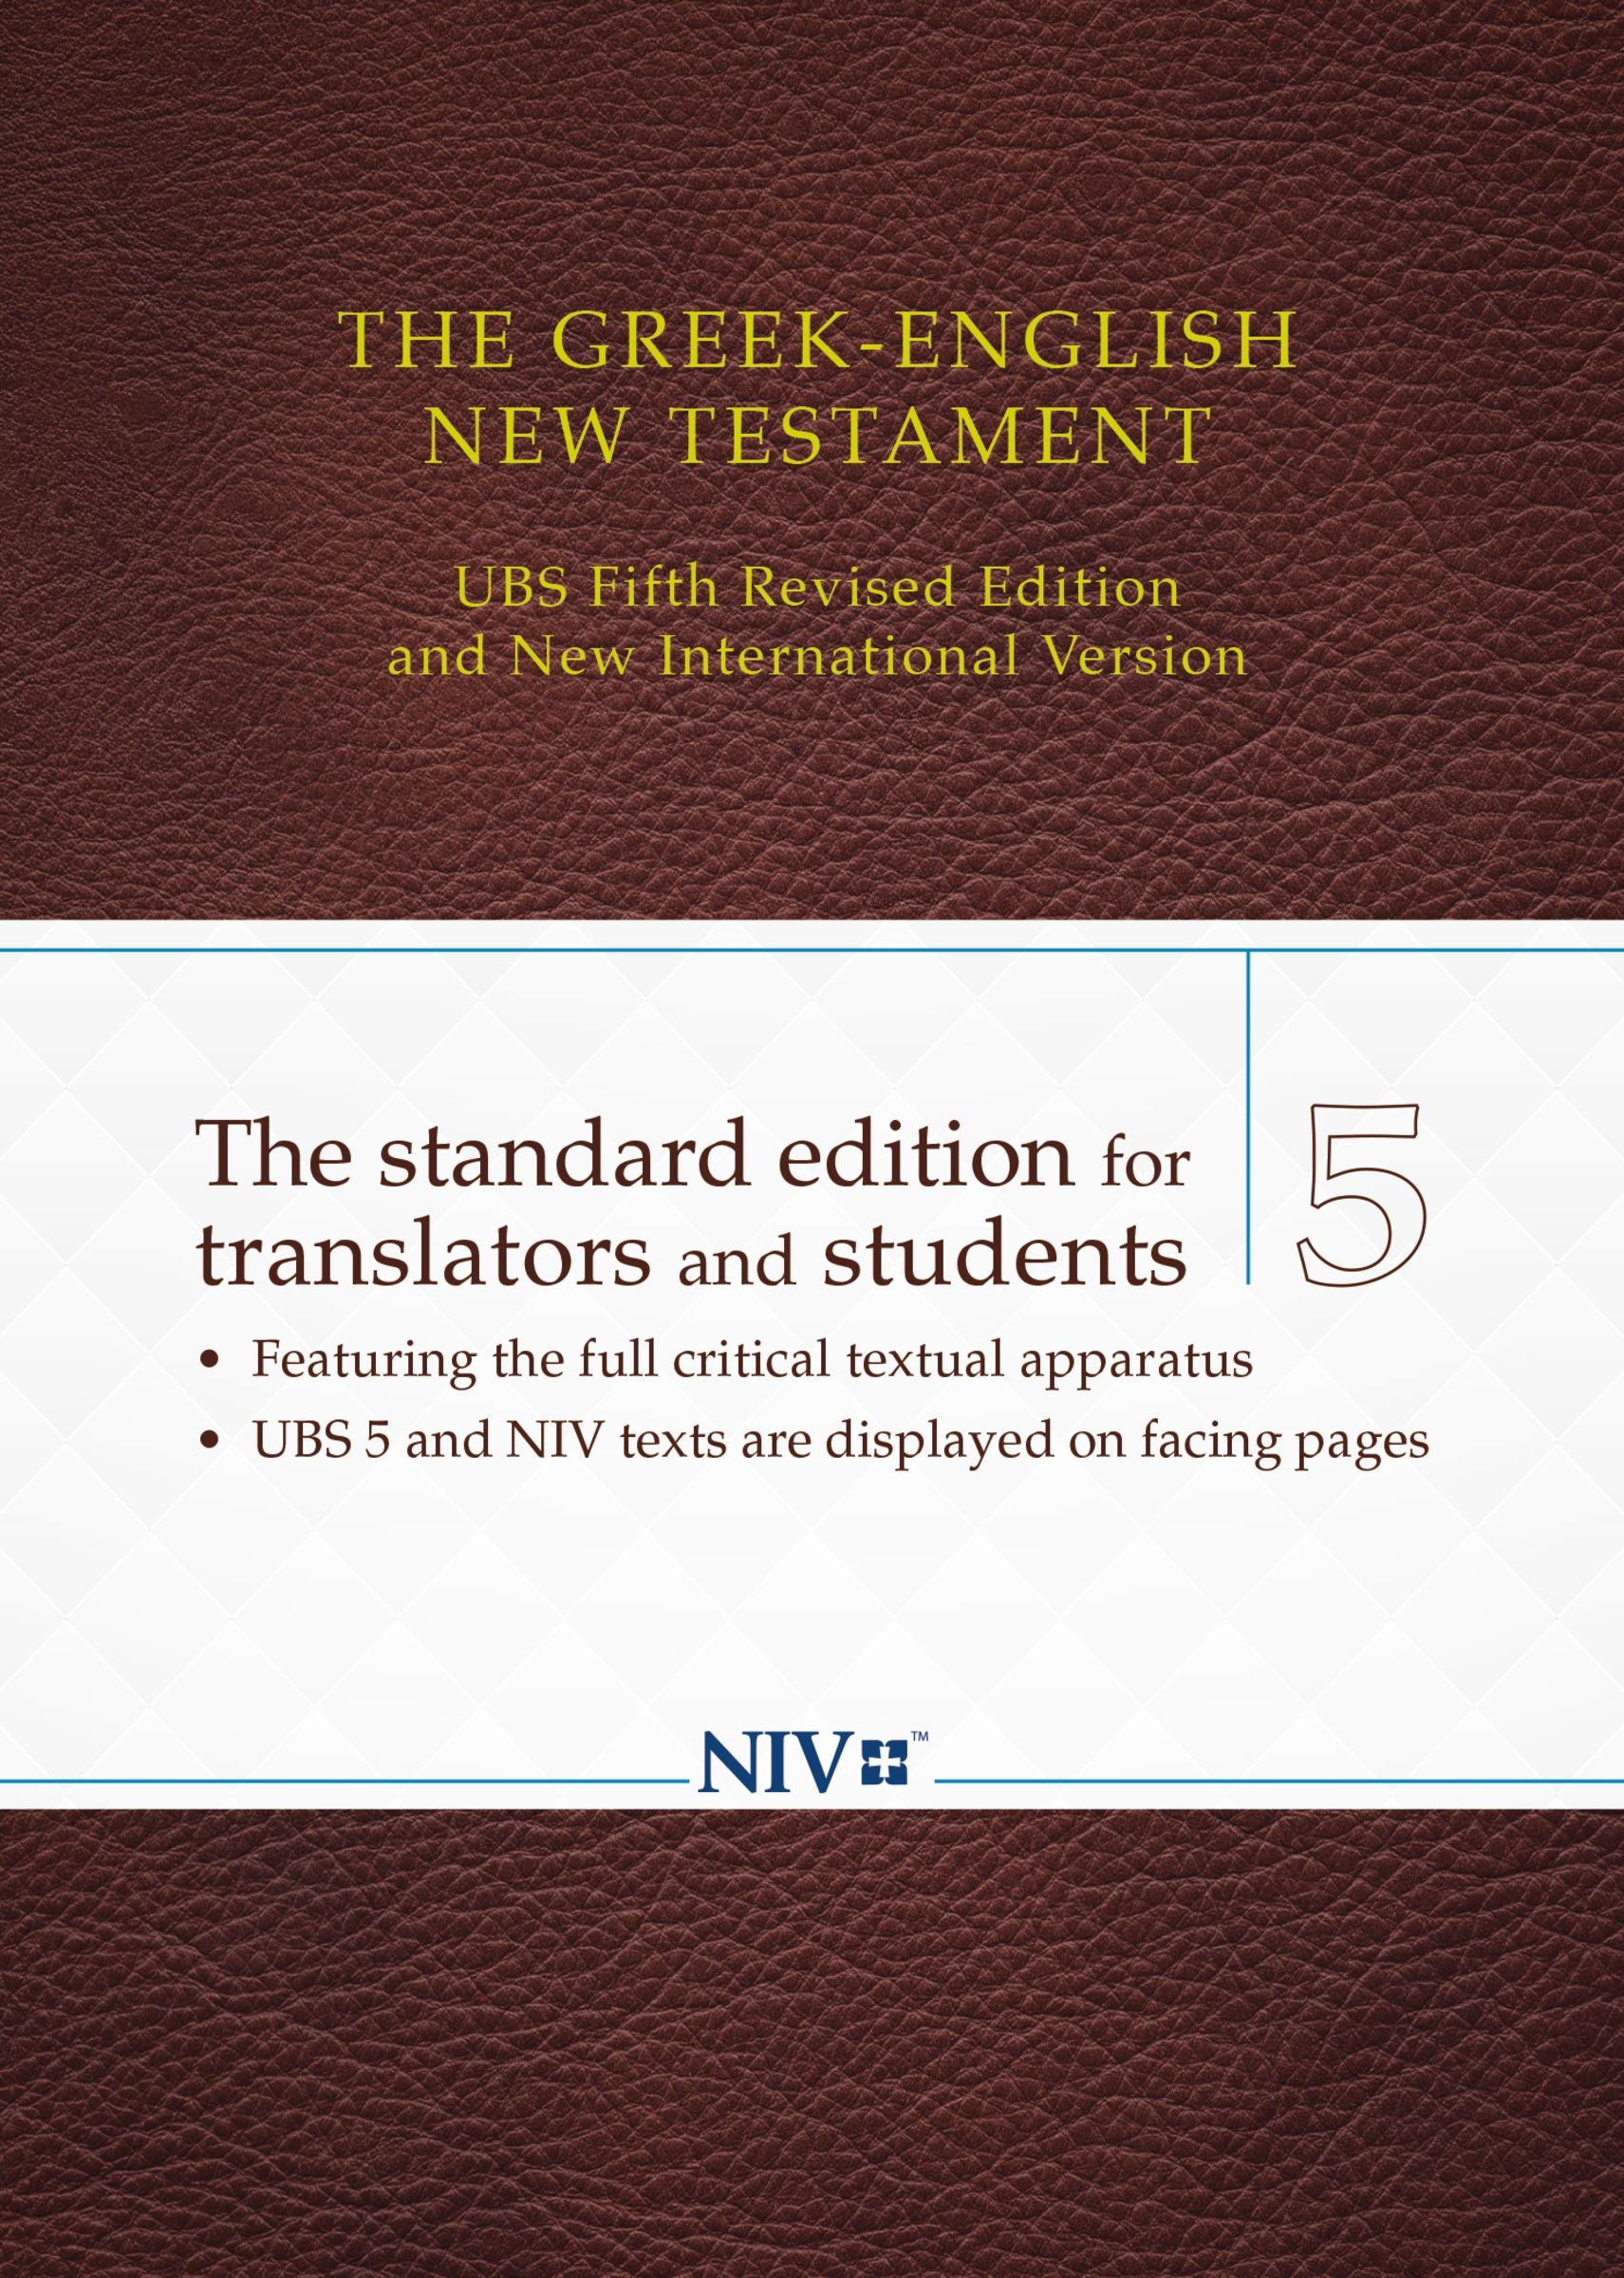 Image of The Greek-English New Testament other